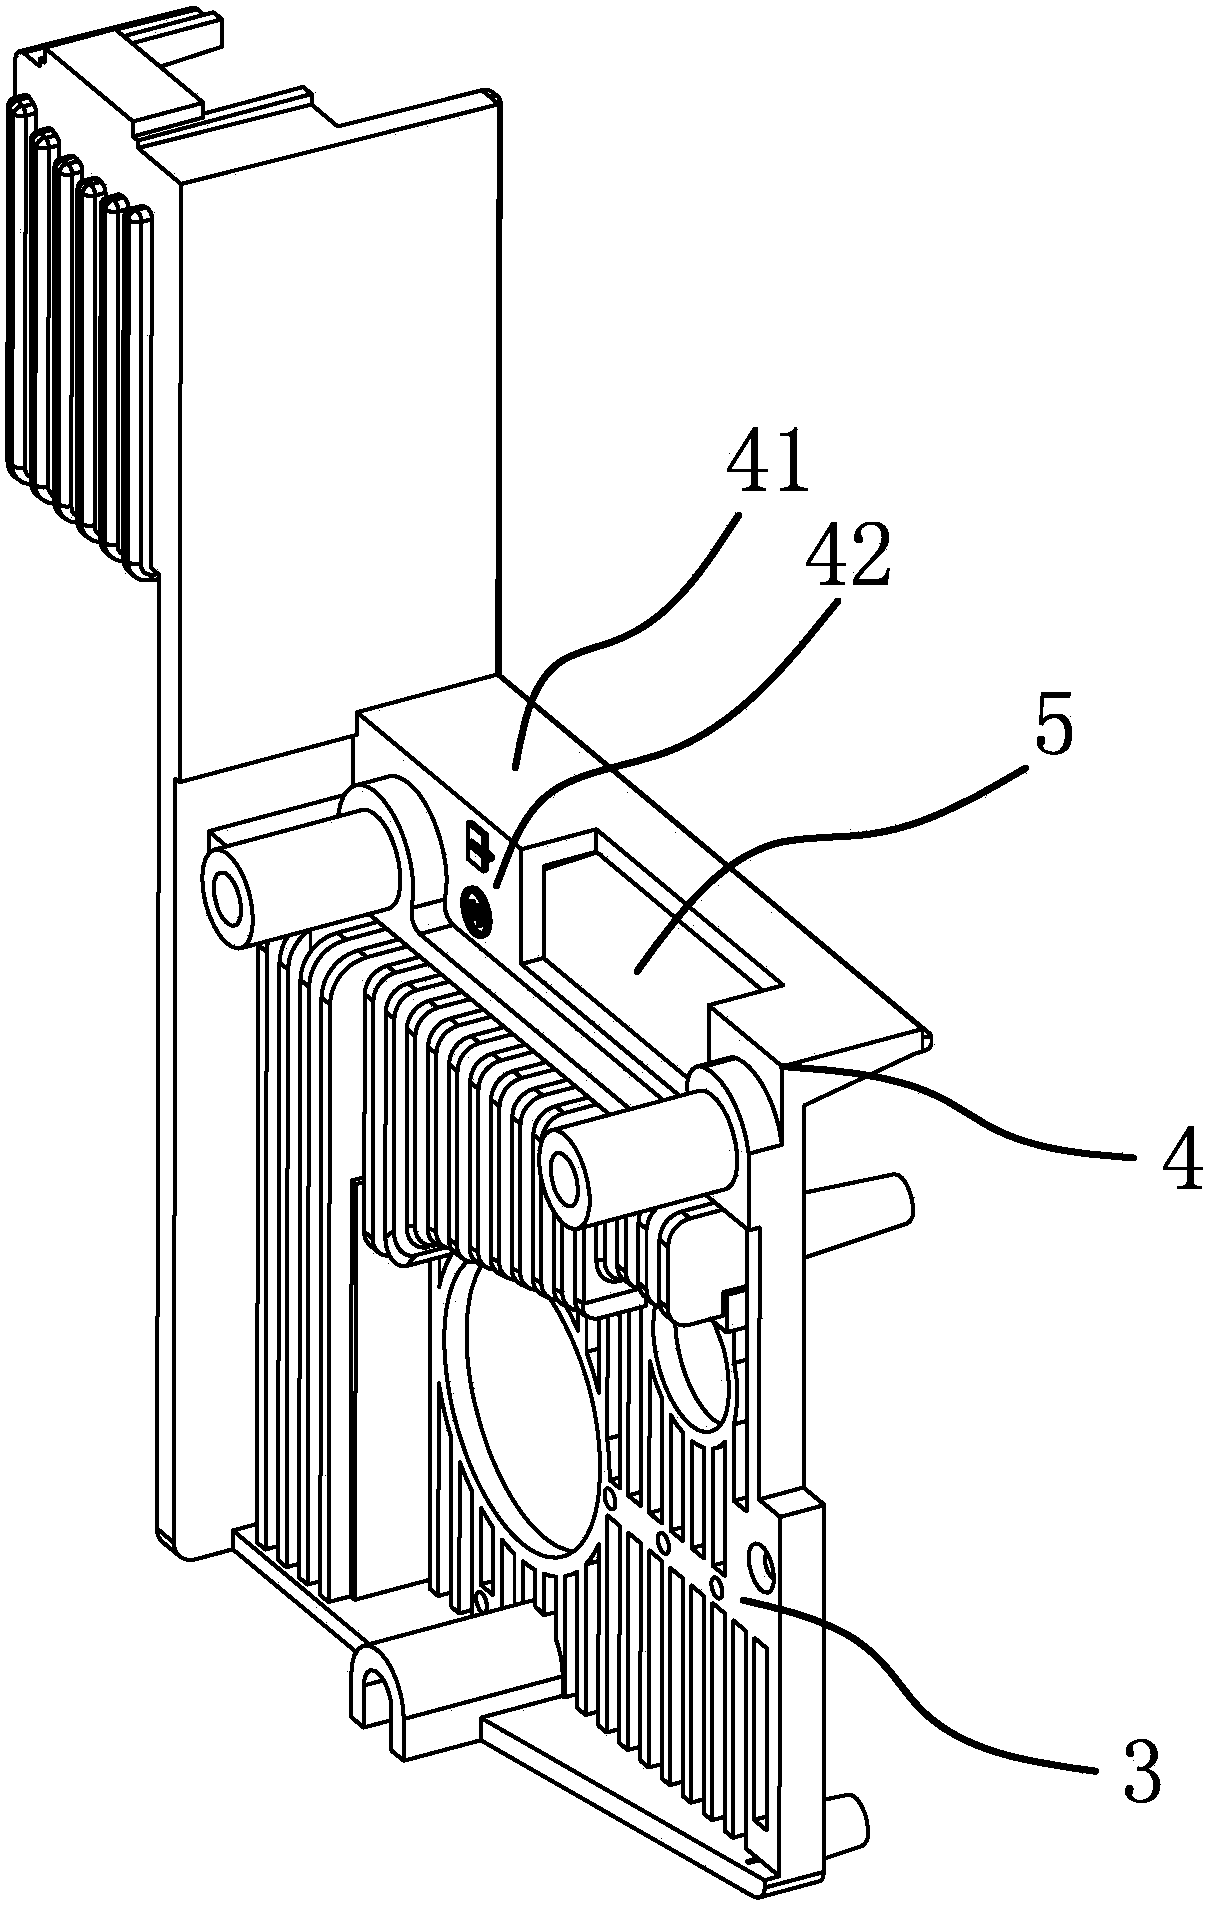 Connecting structure for motor and circuit board in flat sewing machine control device